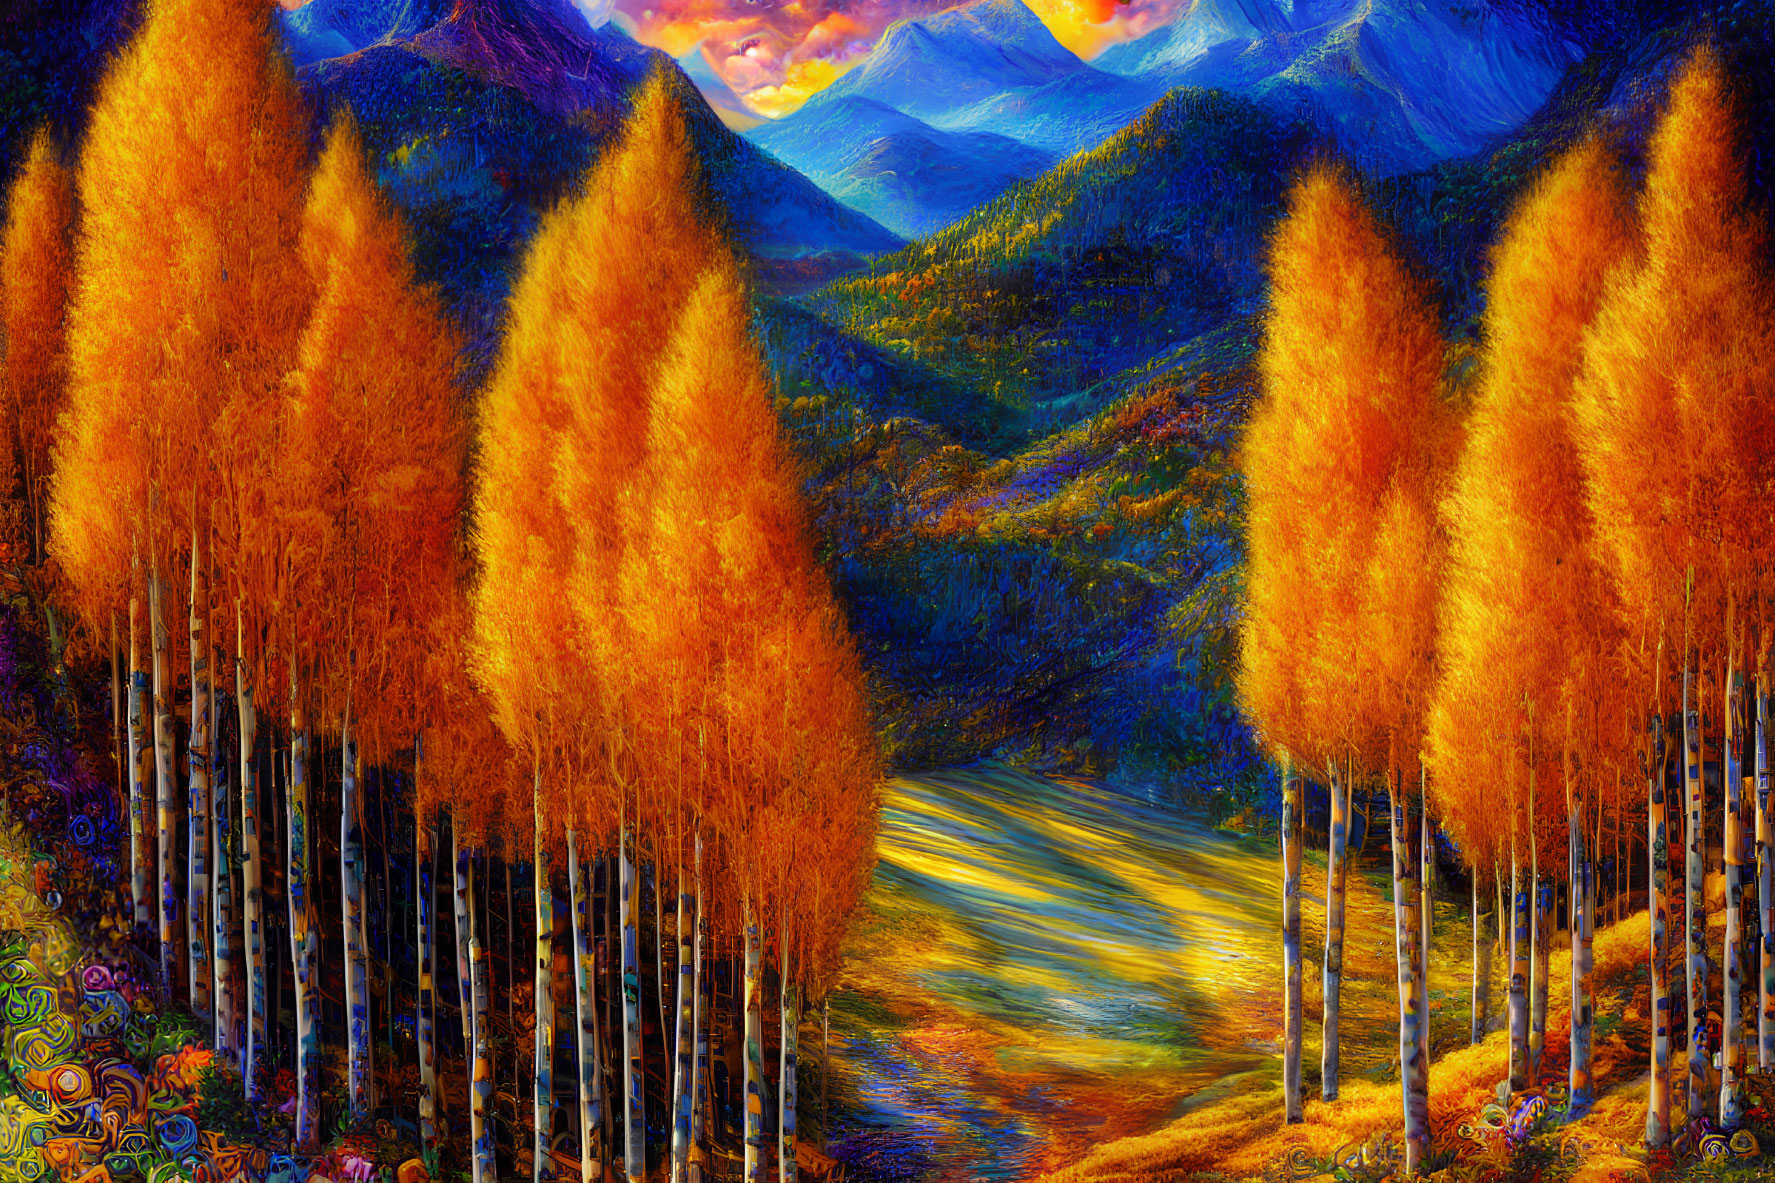 Scenic autumn landscape with golden foliage, thin trees, underbrush, and distant mountains at sunset.